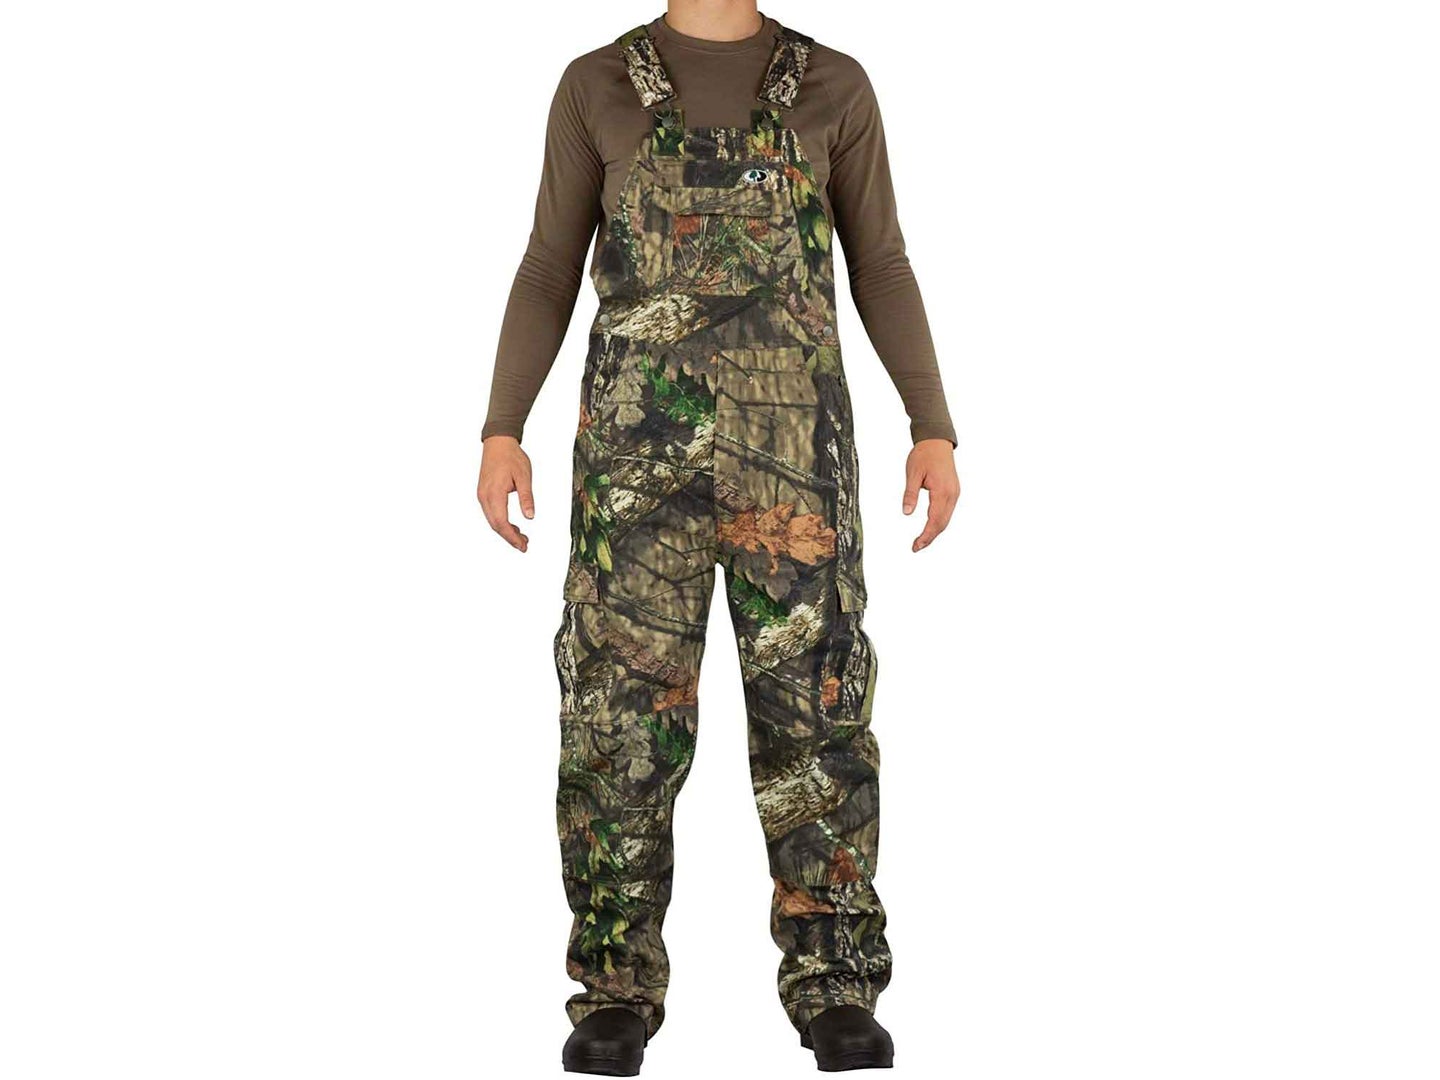 Mossy Oak Cotton Mill 2.0 Camo Hunting Bibs, Uninsulated Camo Overalls for Men